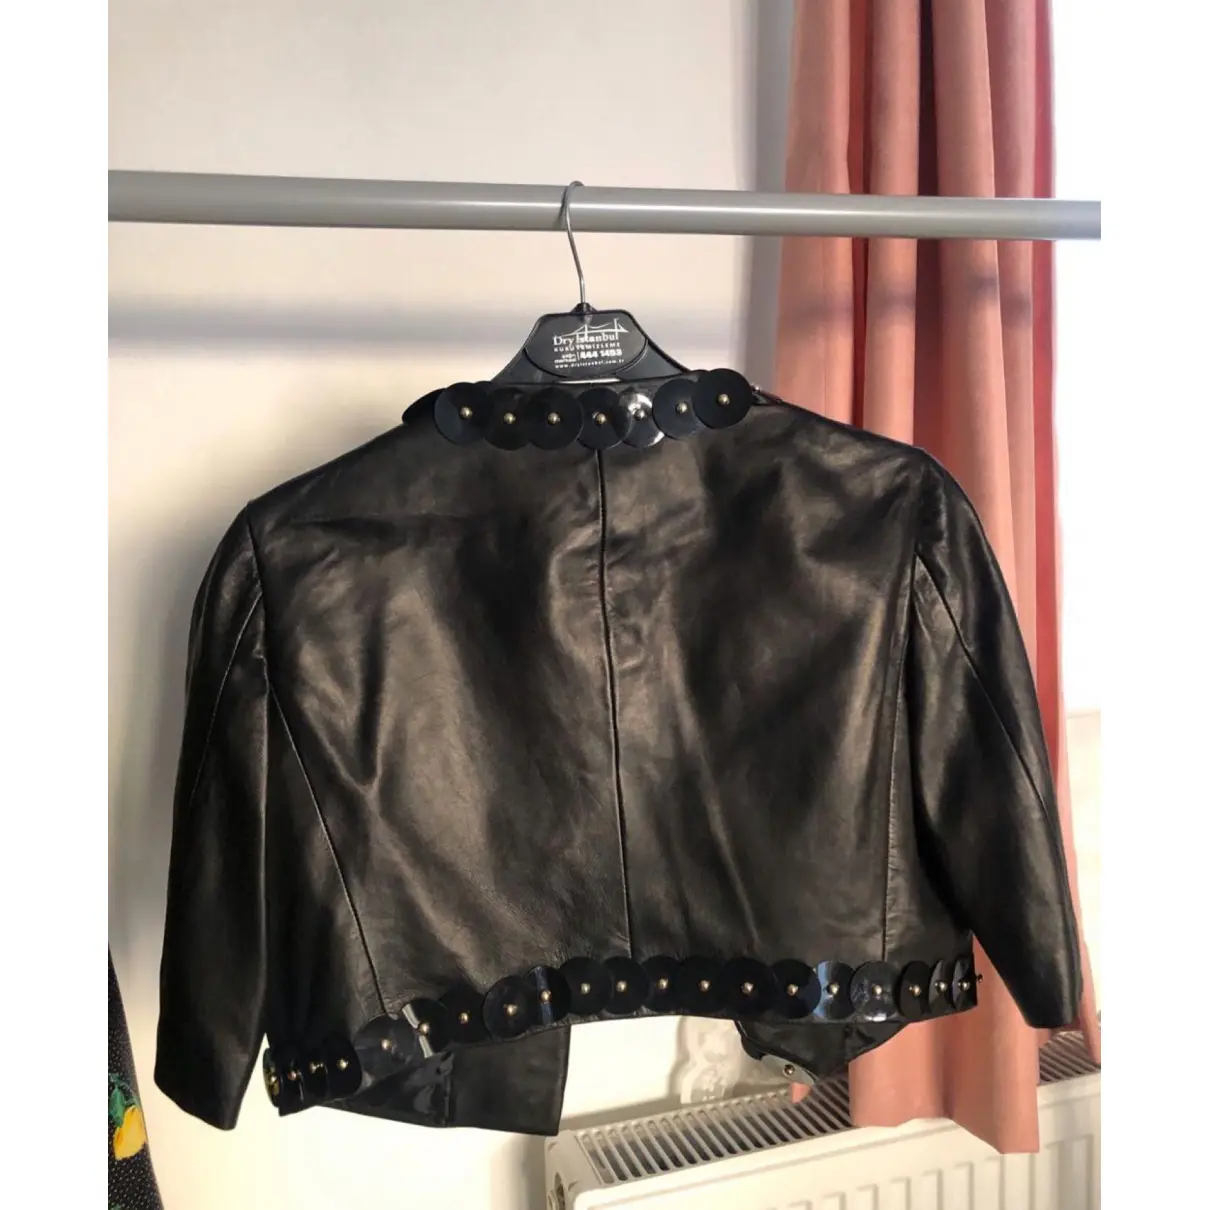 Buy Moschino Cheap And Chic Leather jacket online